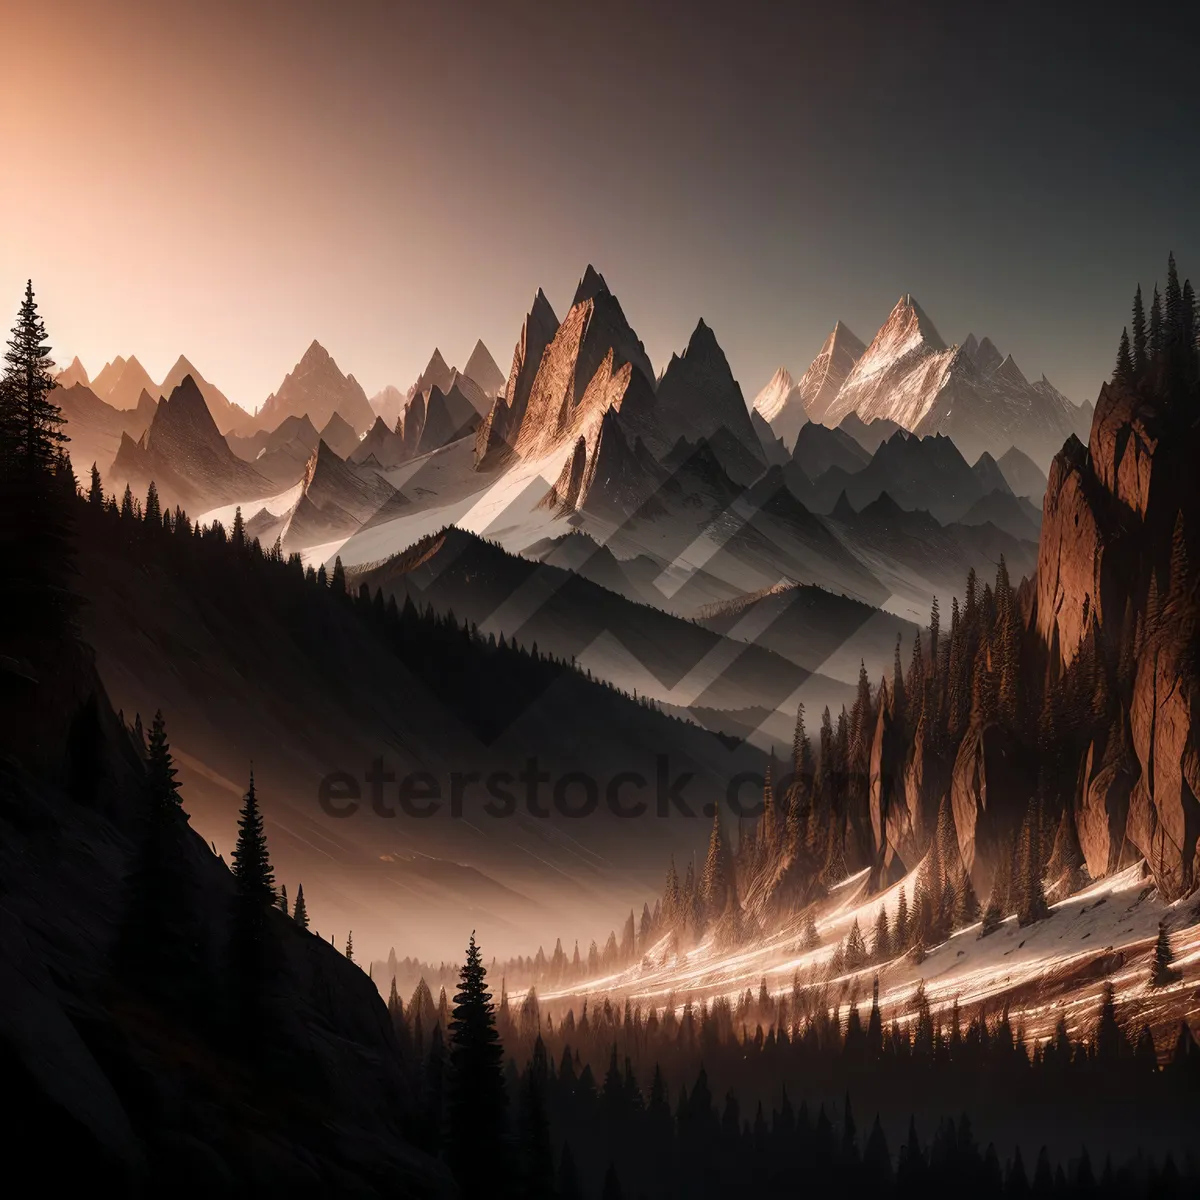 Picture of Snow-capped Alpine Peaks in Majestic Mountain Range